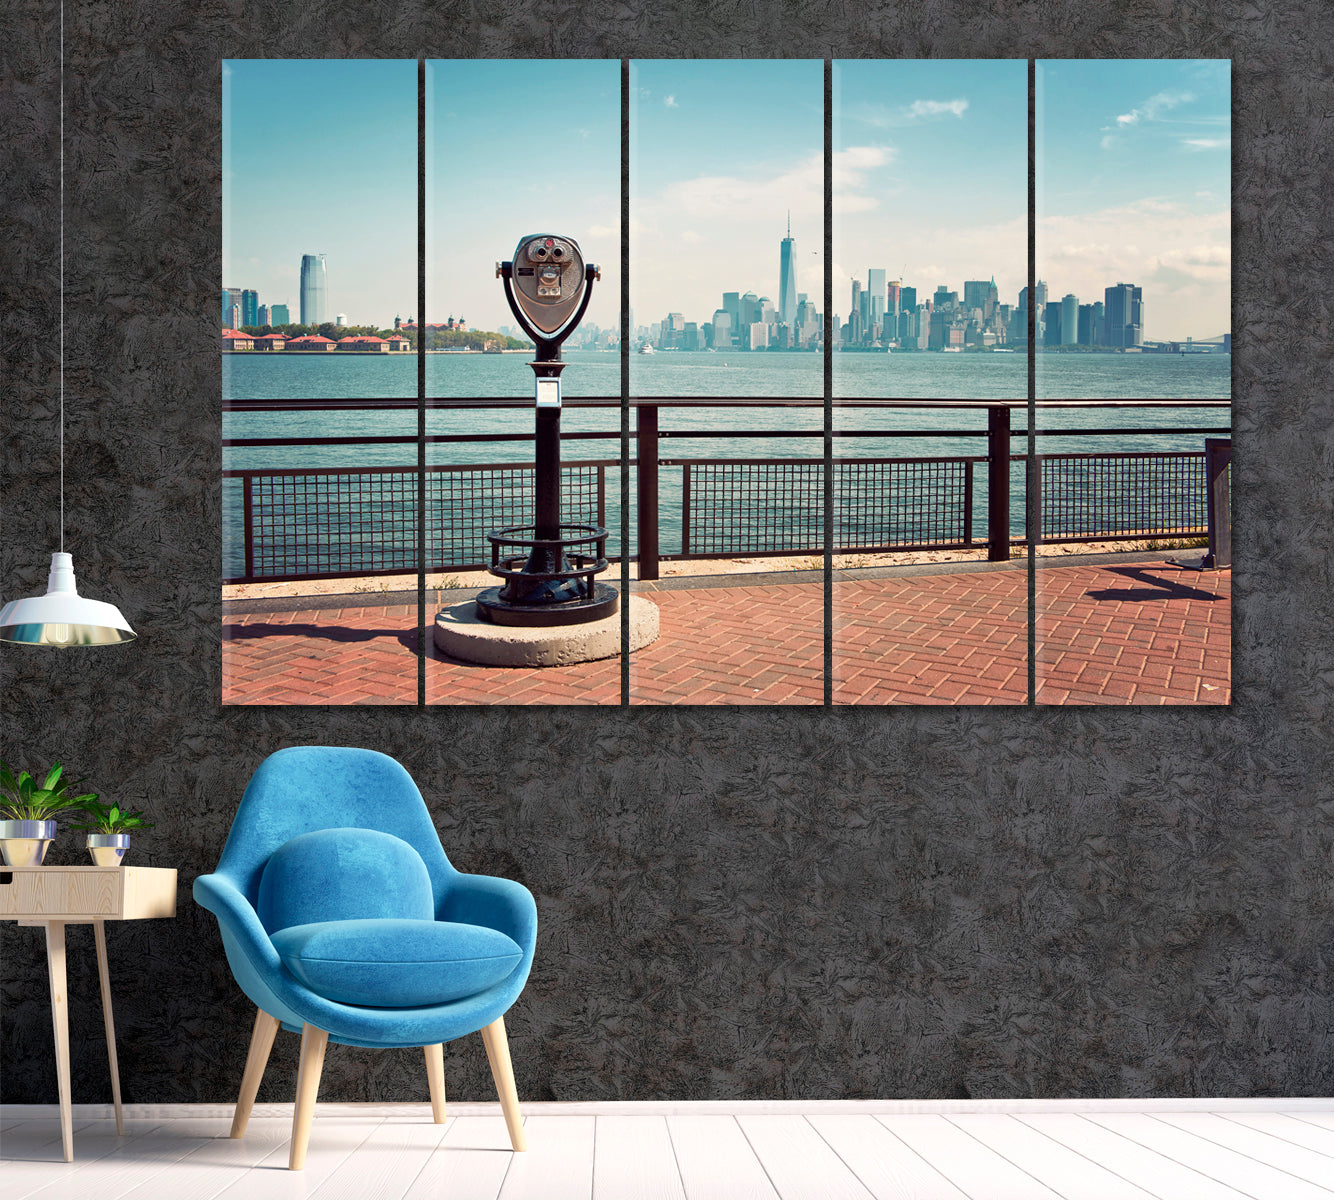 New York City Skyline with Viewfinder Binoculars Canvas Print ArtLexy 5 Panels 36"x24" inches 